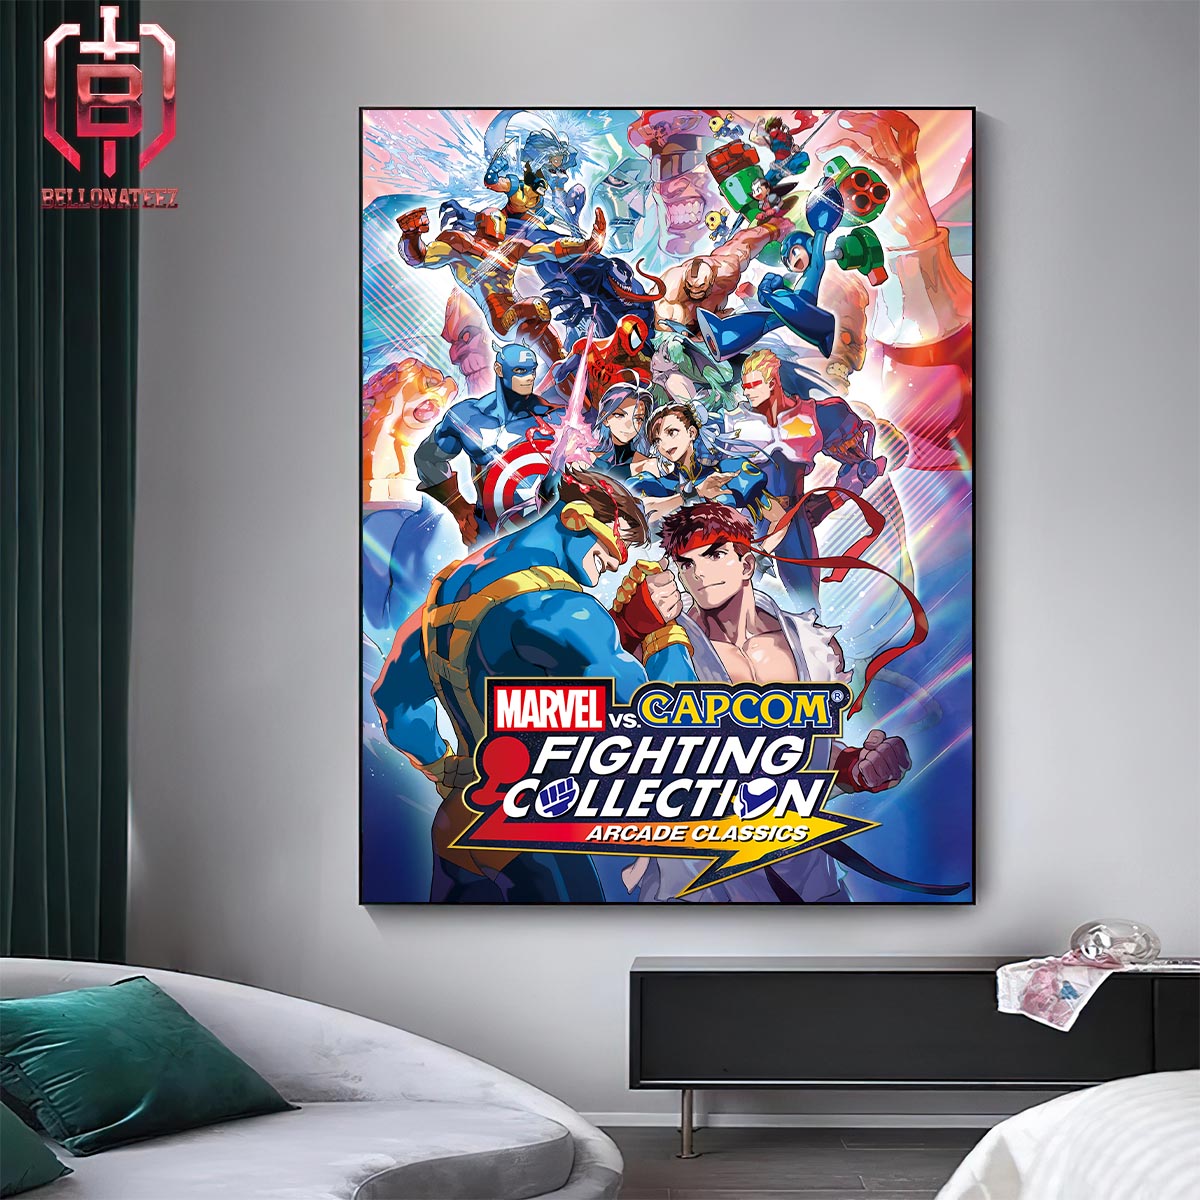 New Collab Game Marvel Versus Capcom Fighting Collection Arcade Classics Home Decor Poster Canvas